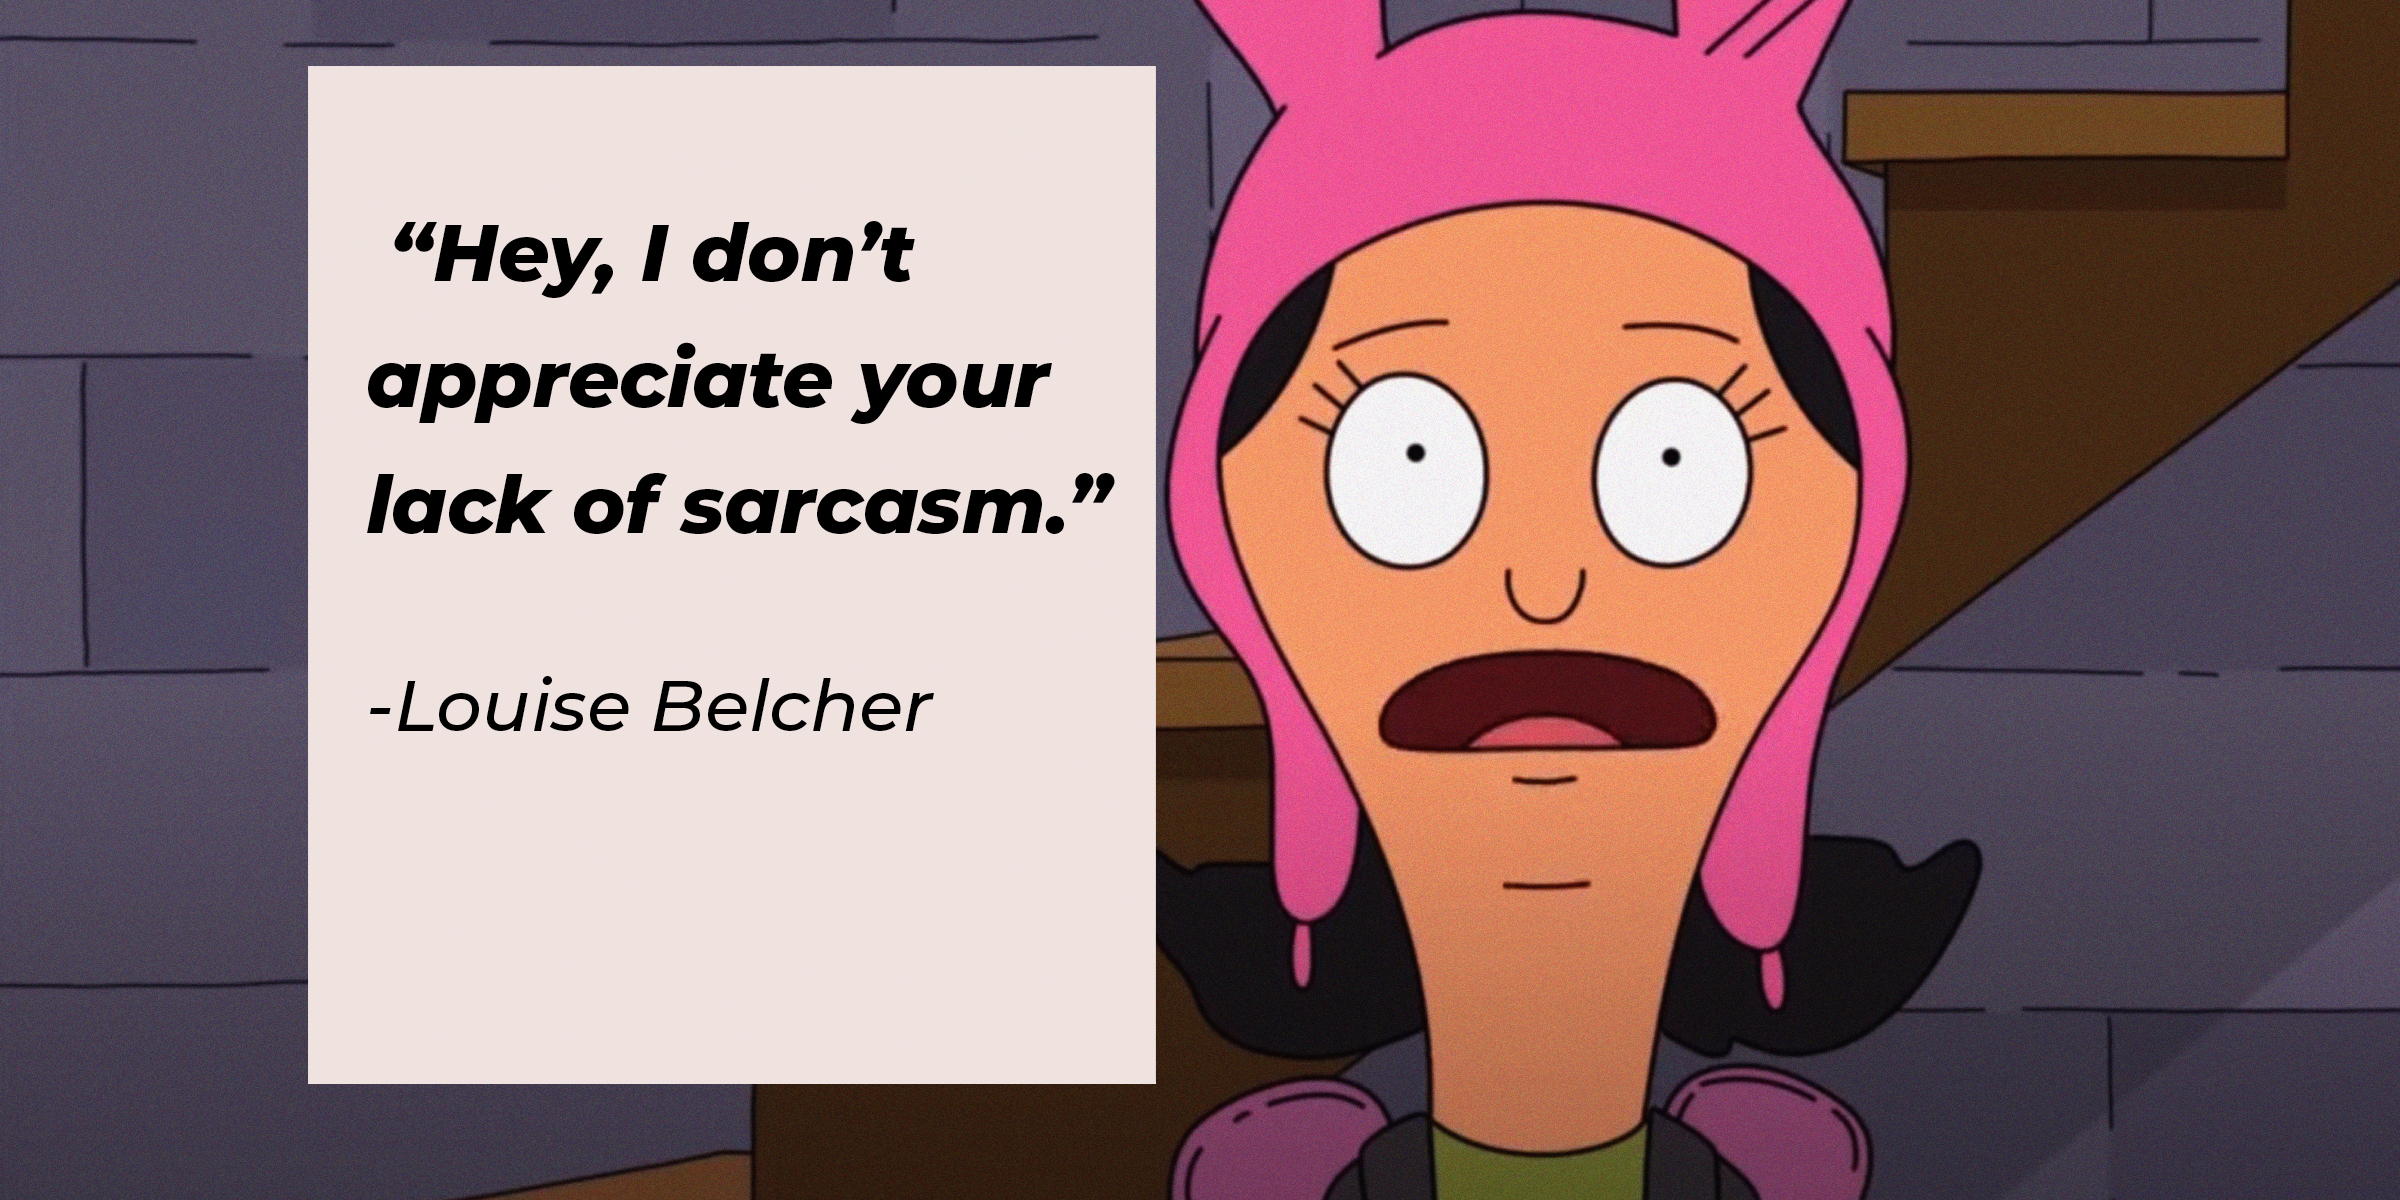 An image of Louise Belcher with her quote: “Hey, I don’t appreciate your lack of sarcasm.” | Source: facebook.com/BobsBurgers